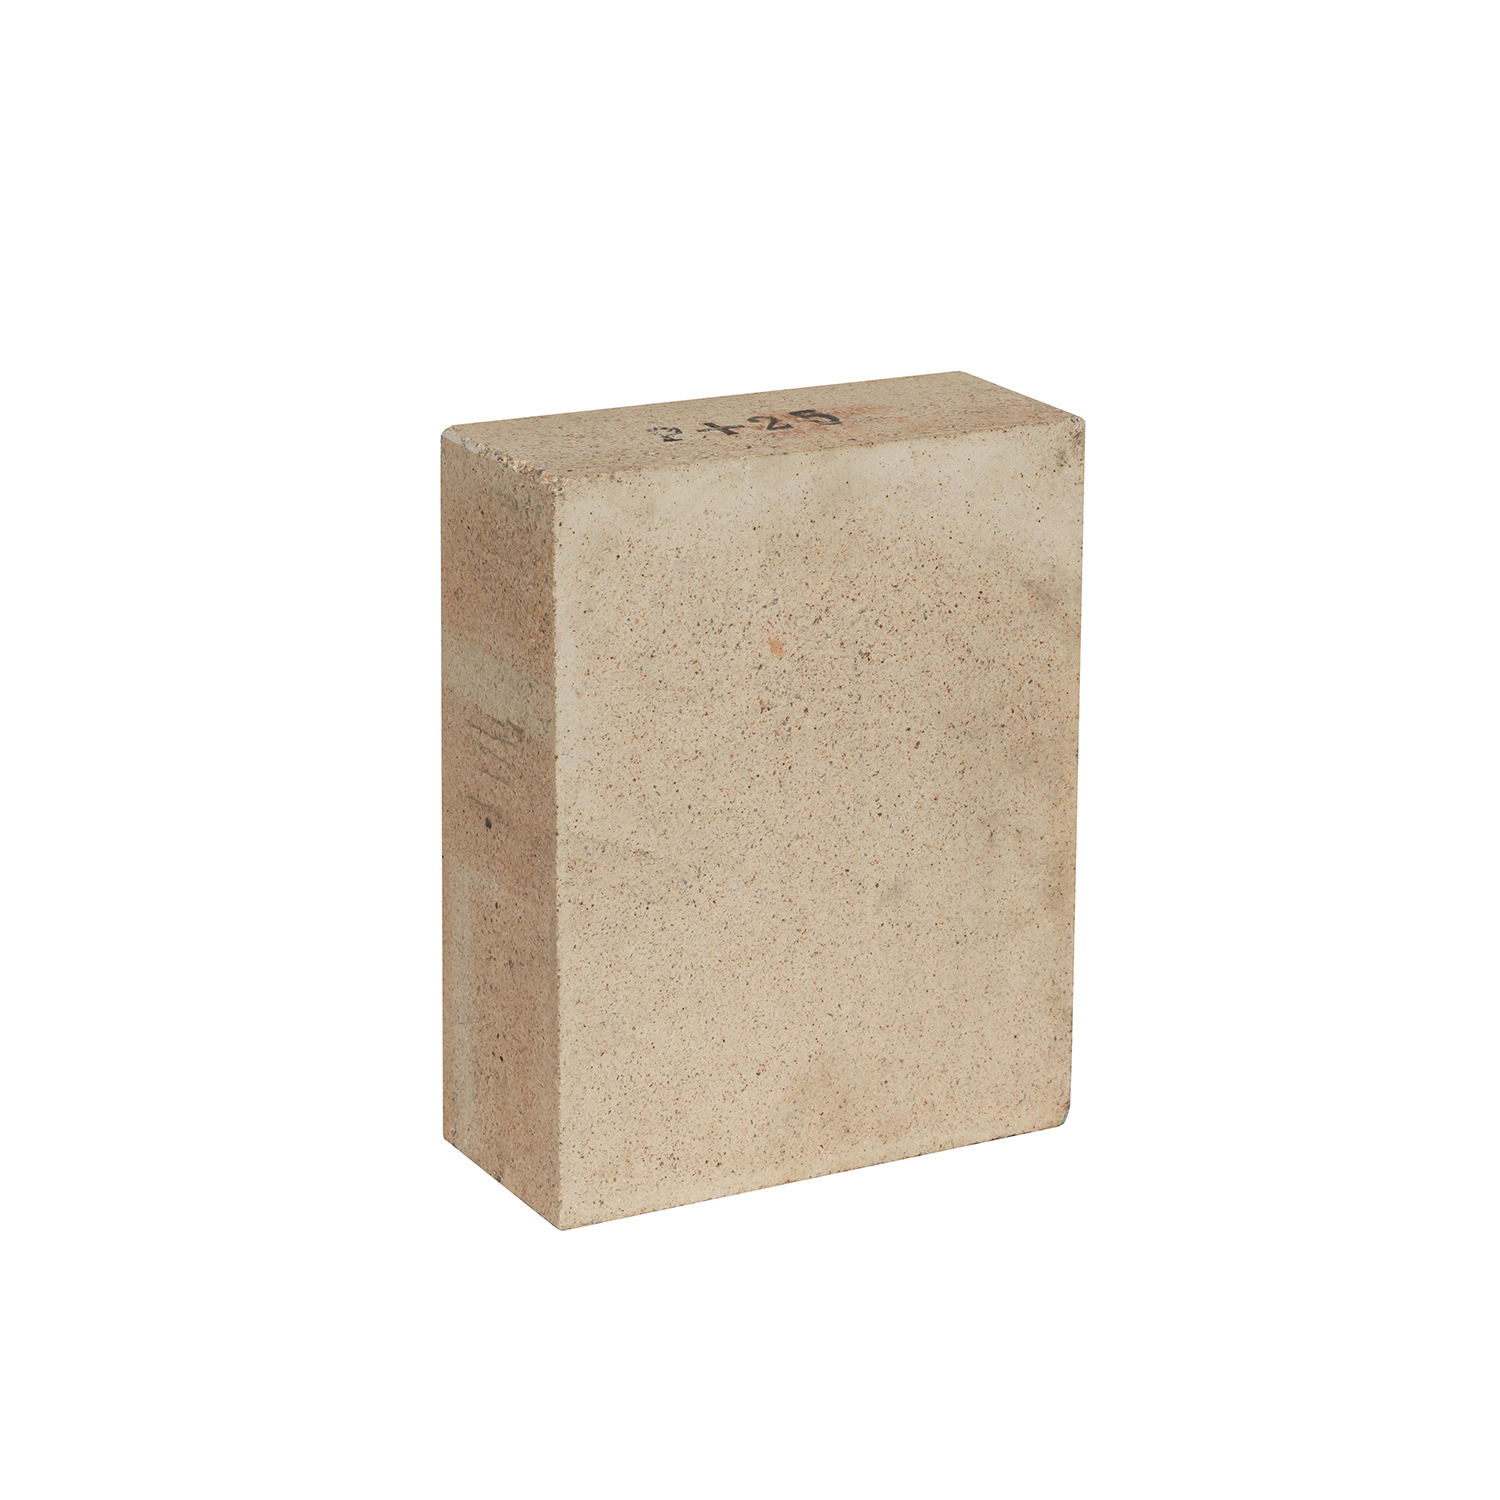 What kind of refractory fire bricks can the cement industry use?